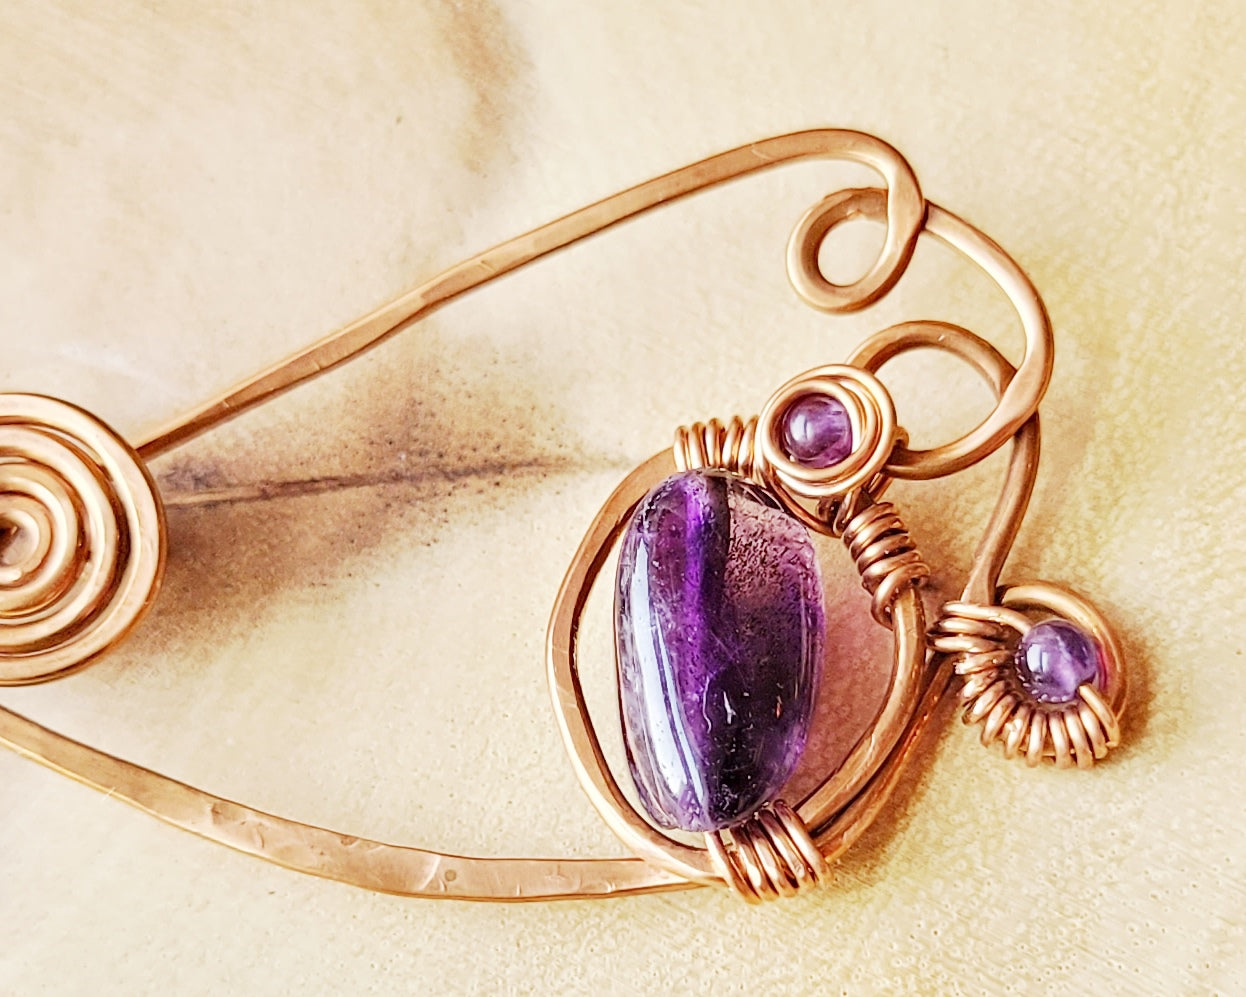 Celtic inspired Brooch / Kit Pin with repurposed, Upcycled Copper wire and natural Purple Amethyst